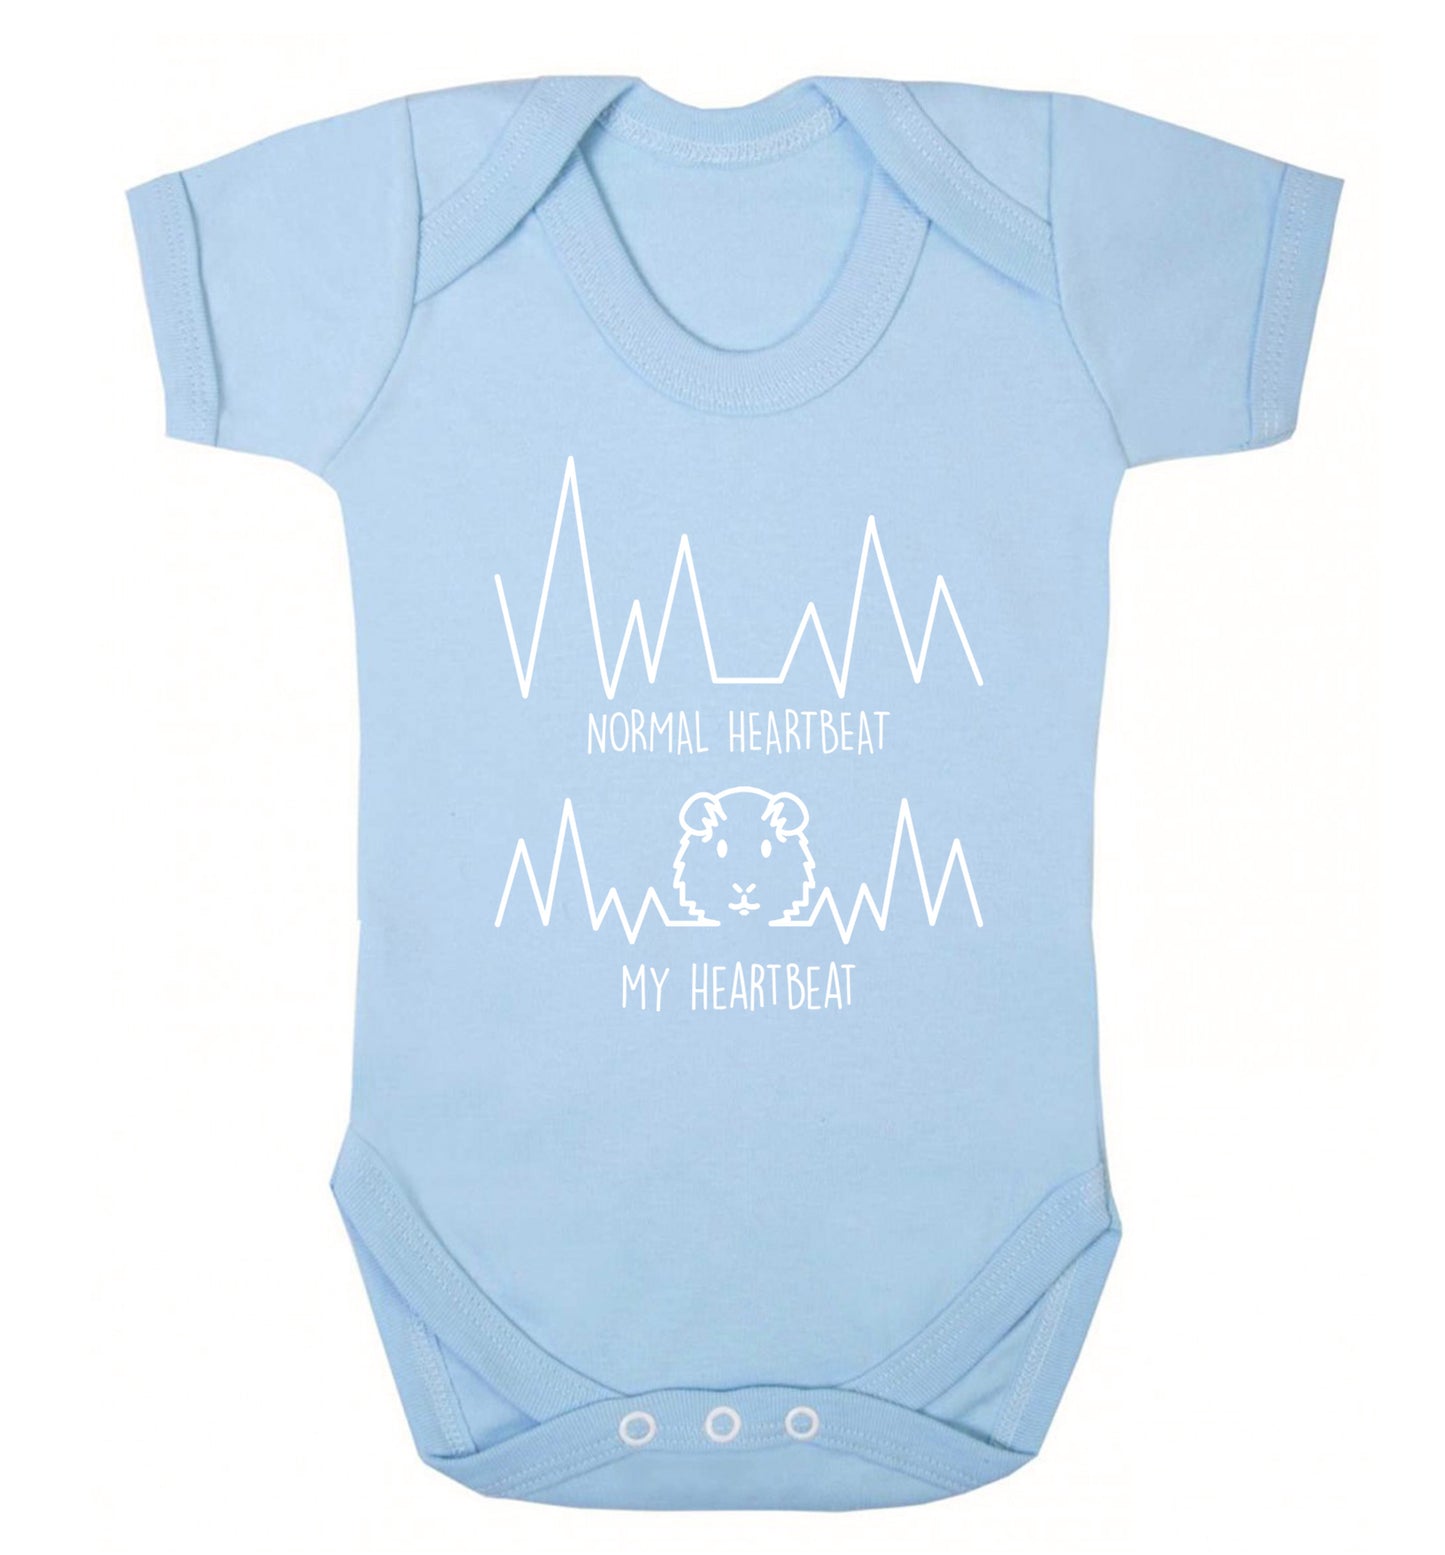 Normal heartbeat vs my heartbeat guinea pig lover Baby Vest pale blue 18-24 months